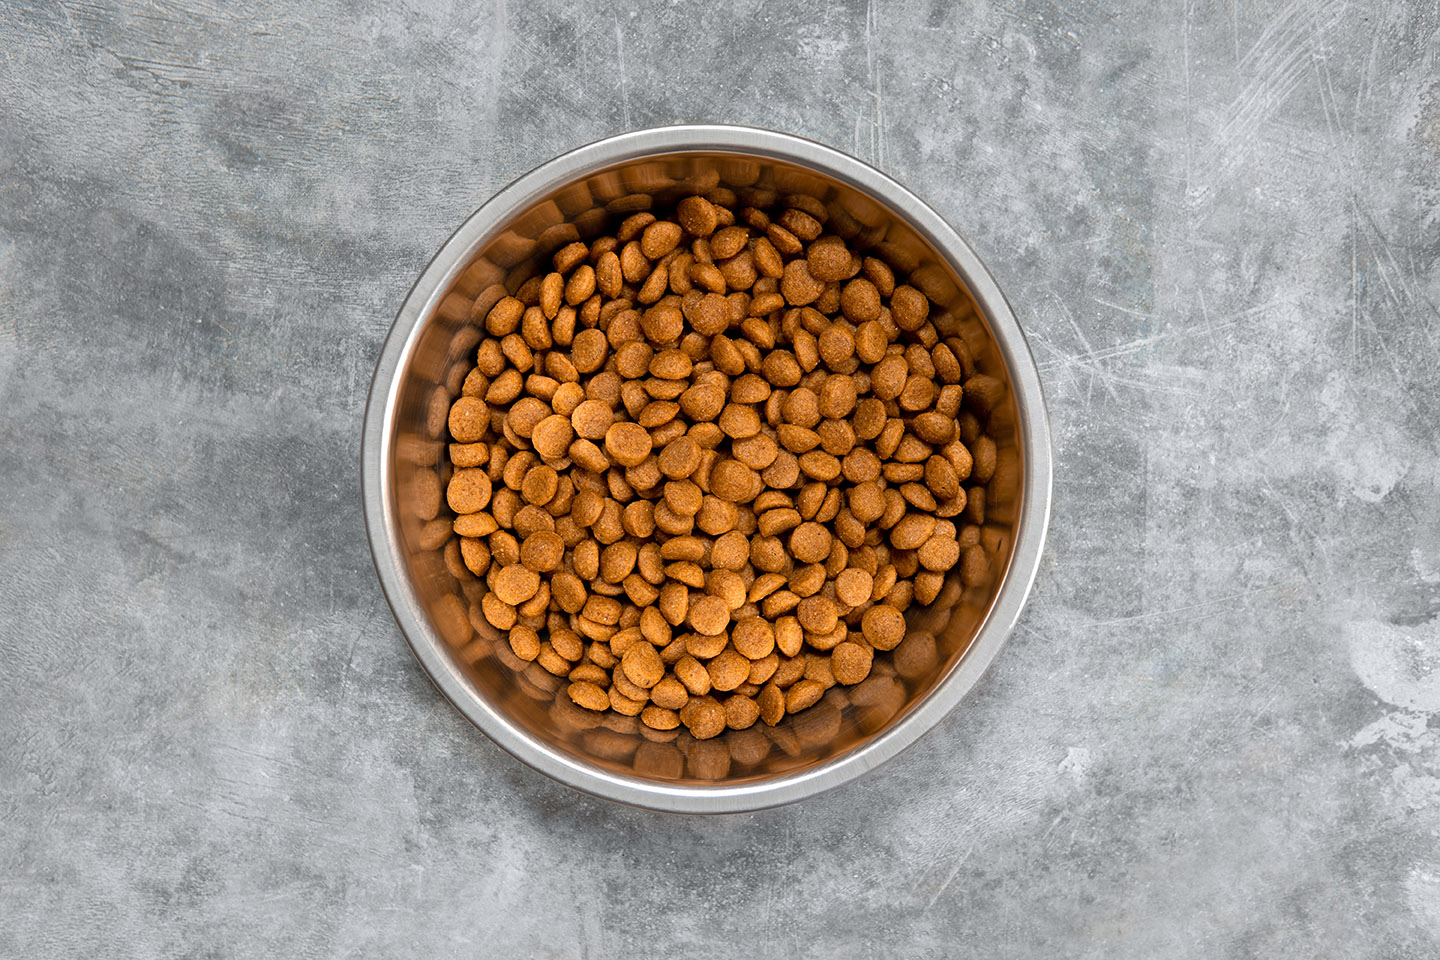 Top view of Dry dog food in a stainless steel bowl with concrete background.